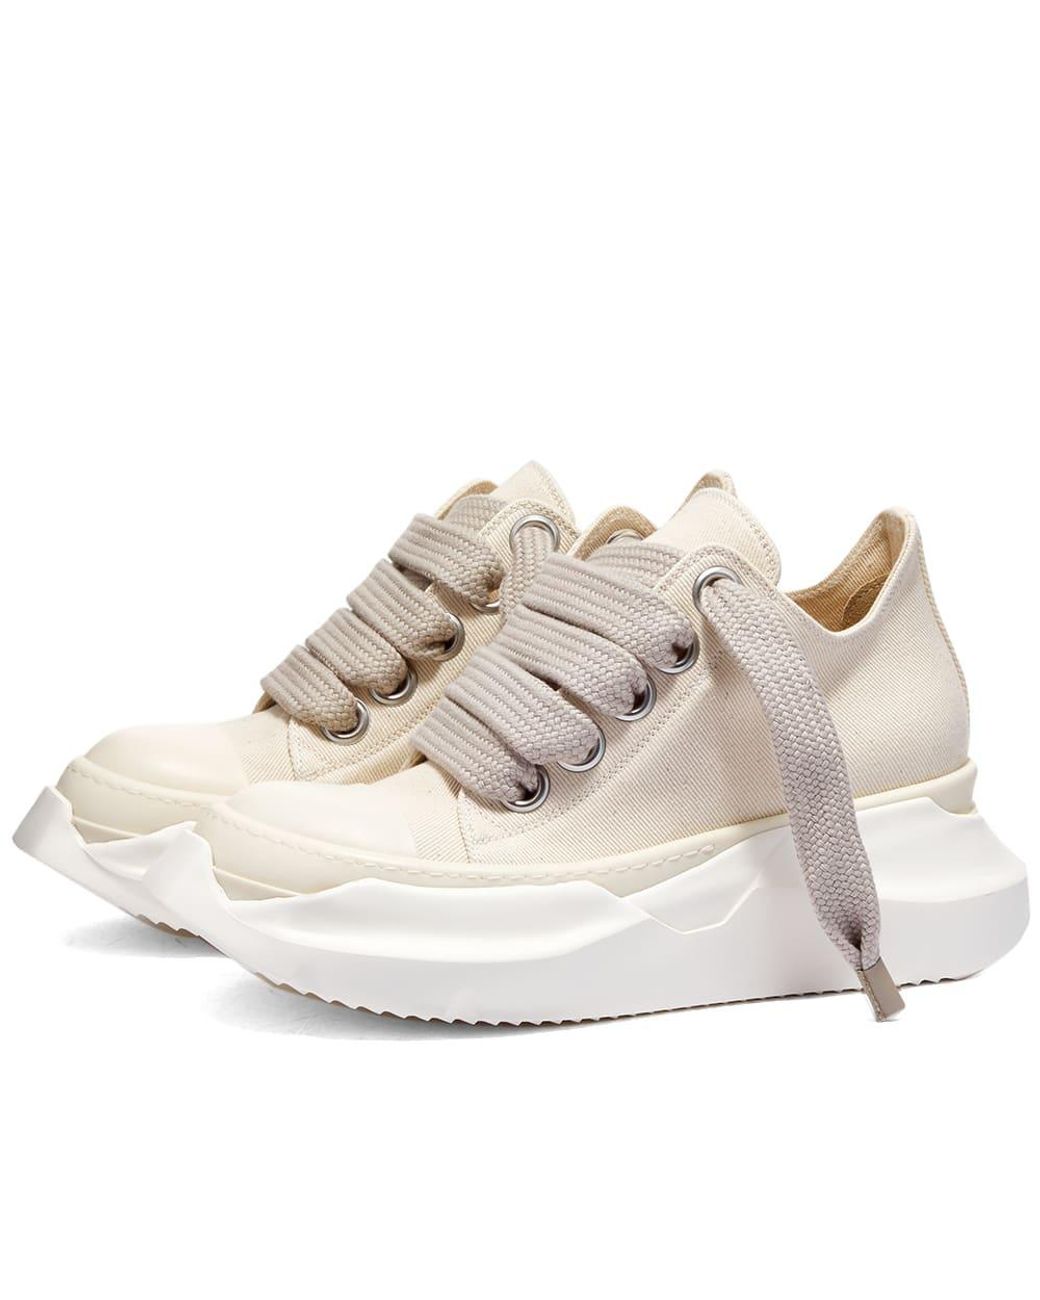 Rick Owens Drkshdw Abstract Low Sneakers in Natural | Lyst UK